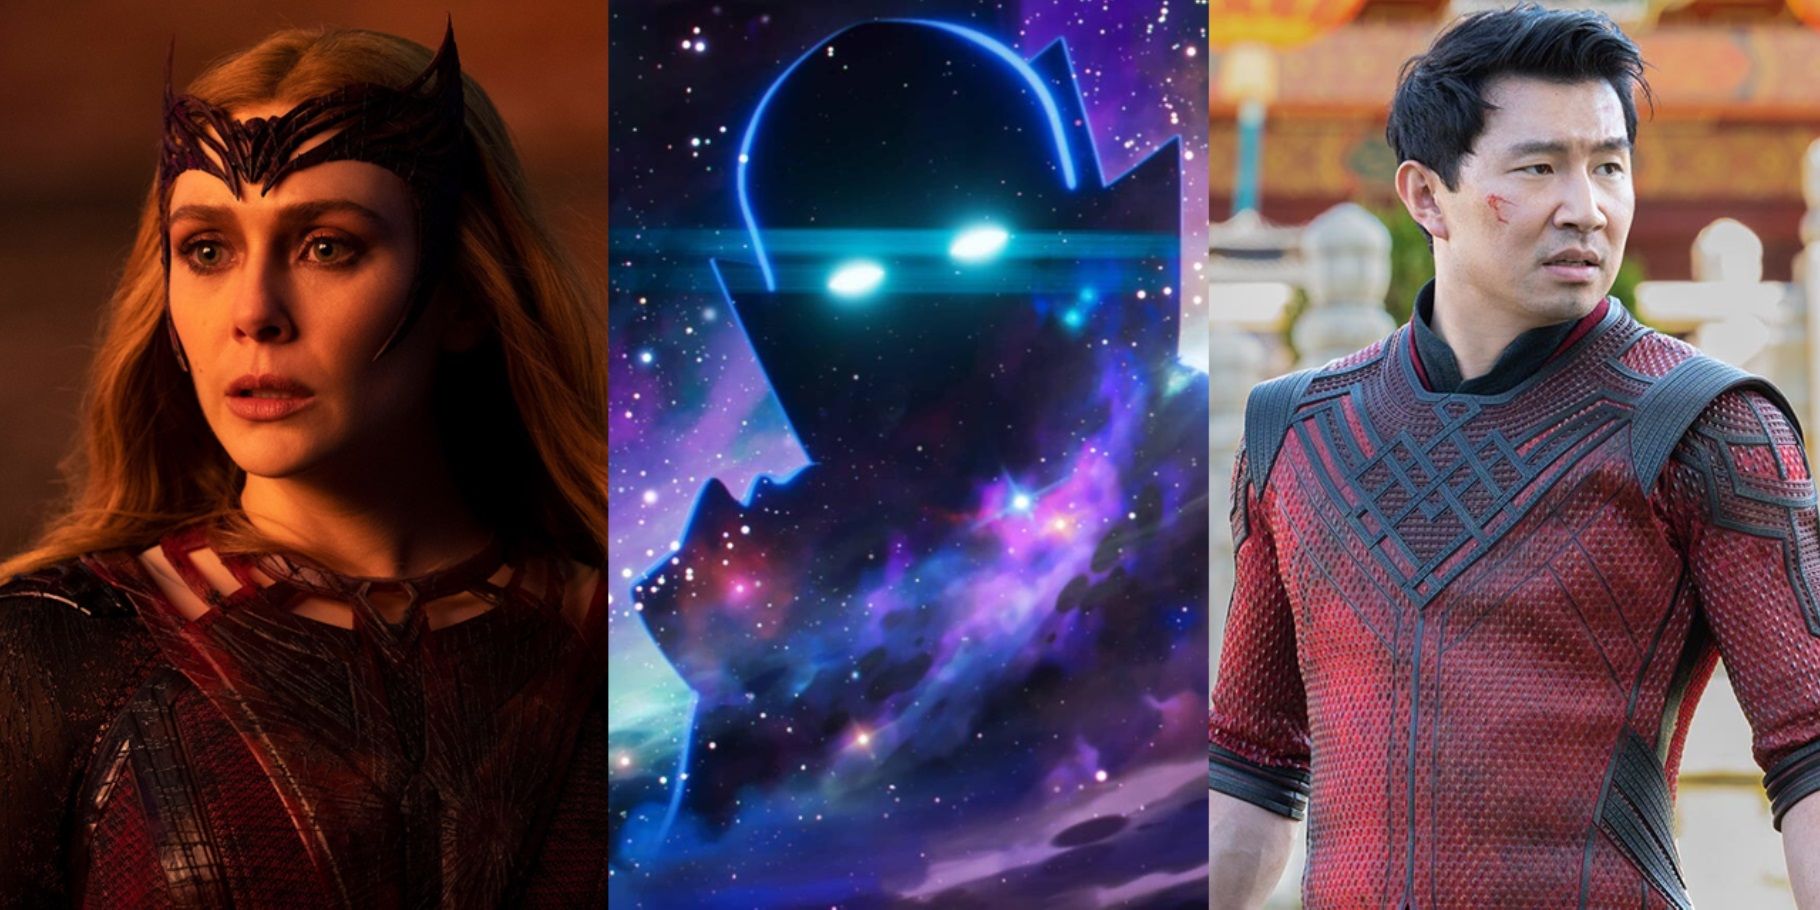 Split image of Wanda in Multiverse of Madness, the Watcher in What If, and Shang-Chi in Shang-Chi and the Legend of the Ten Rings